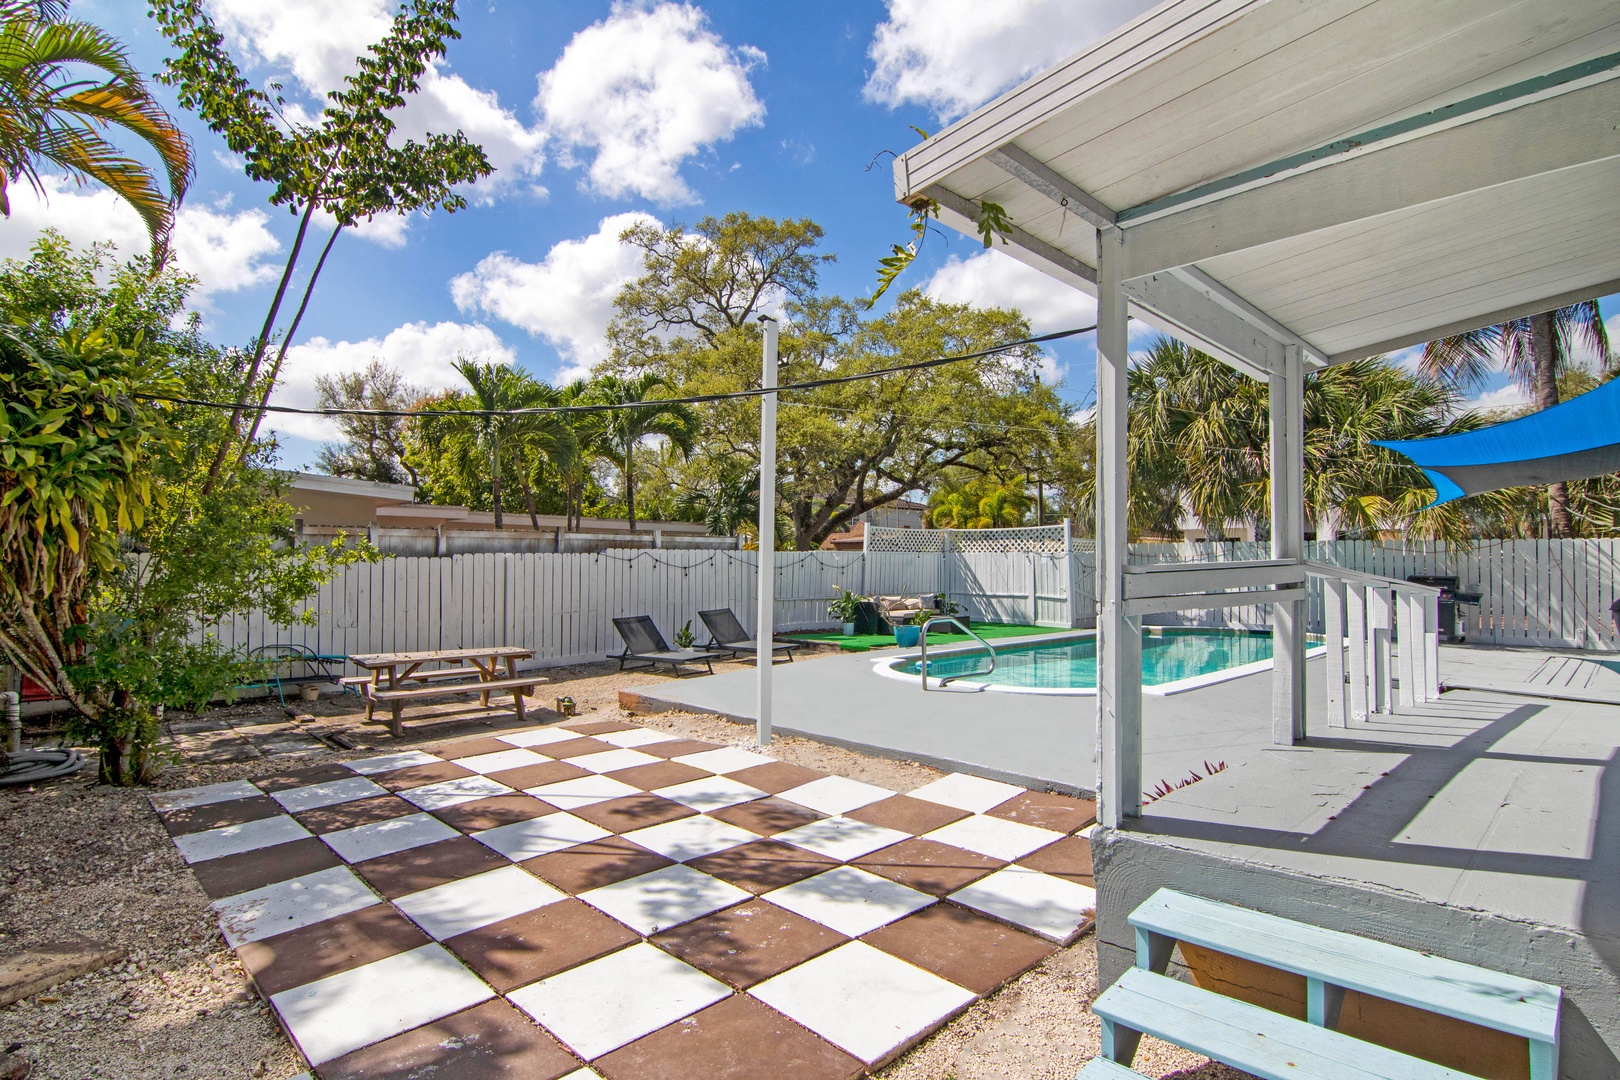 Make a splash in the sparkling shared pool or dine alfresco on the patio